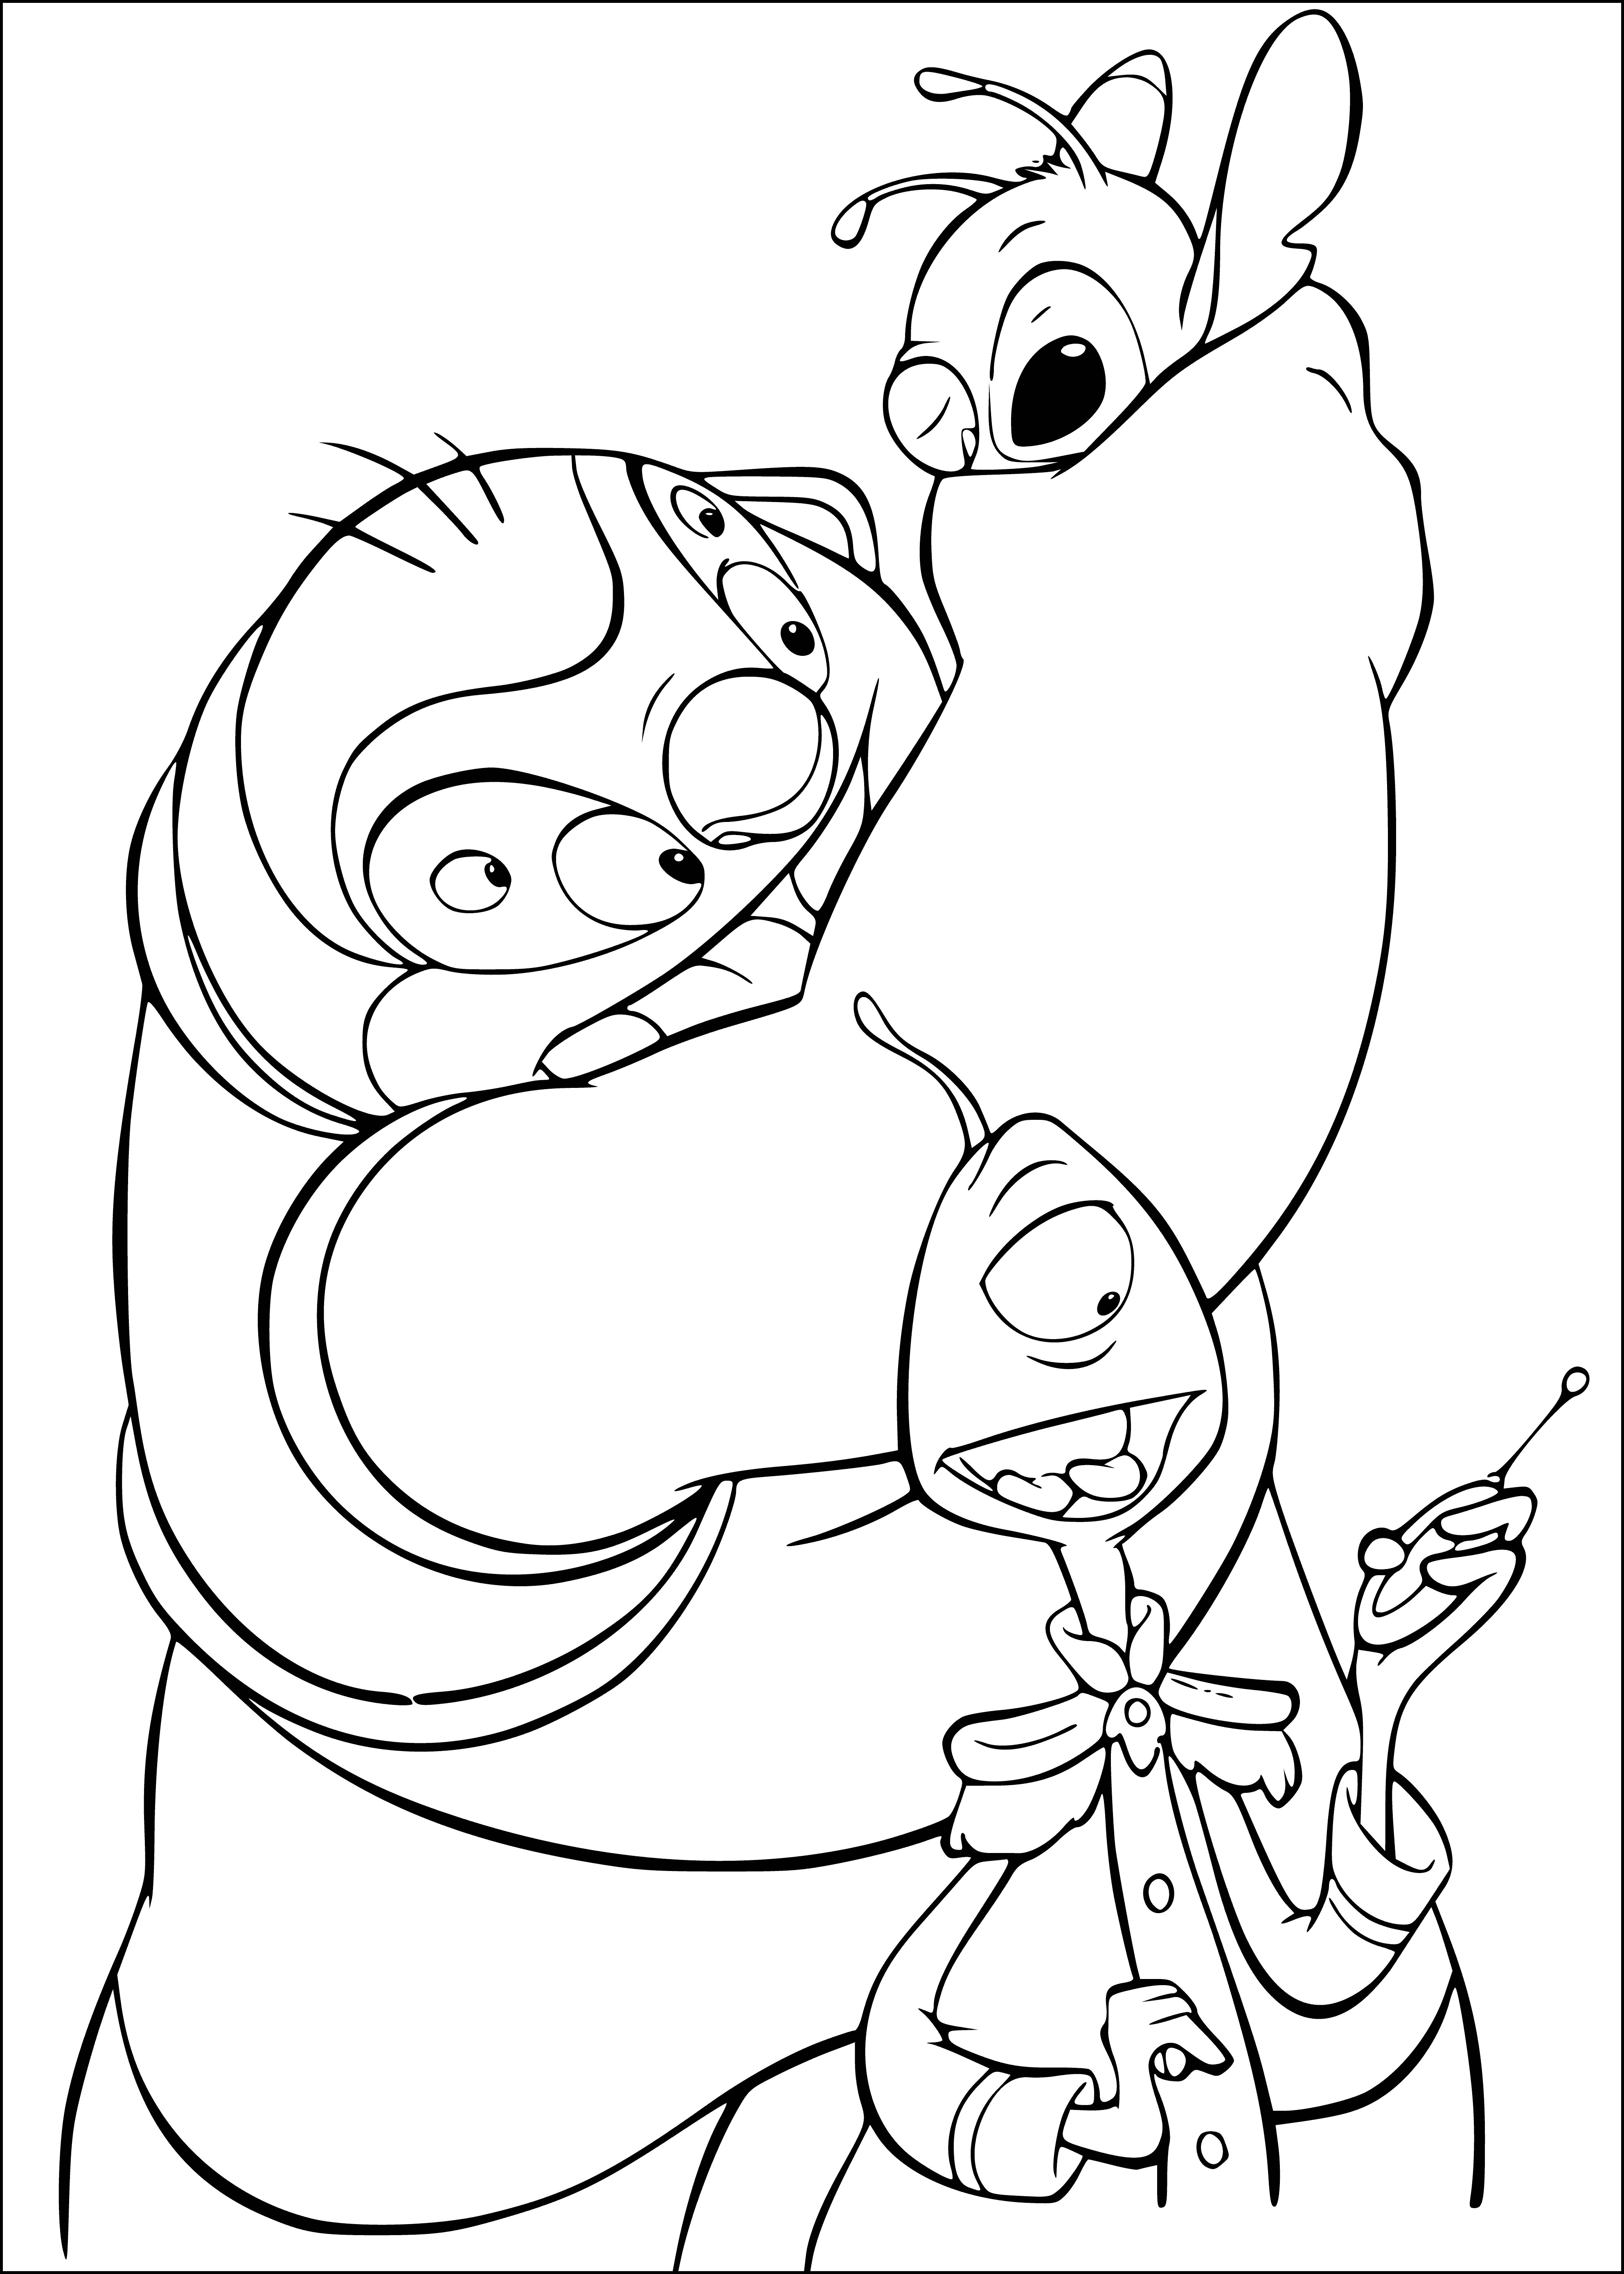 coloring page: Coloring page of Jamba, Flickley, & Stitch from Disney's Lilo & Stitch. Jamba is blue with 4 arms & 4 legs, wearing red & blue. Flickley is yellow with 4 legs & 2 arms, wearing green & blue. Stitch is blue with 2 arms & 2 legs, wearing red & blue.